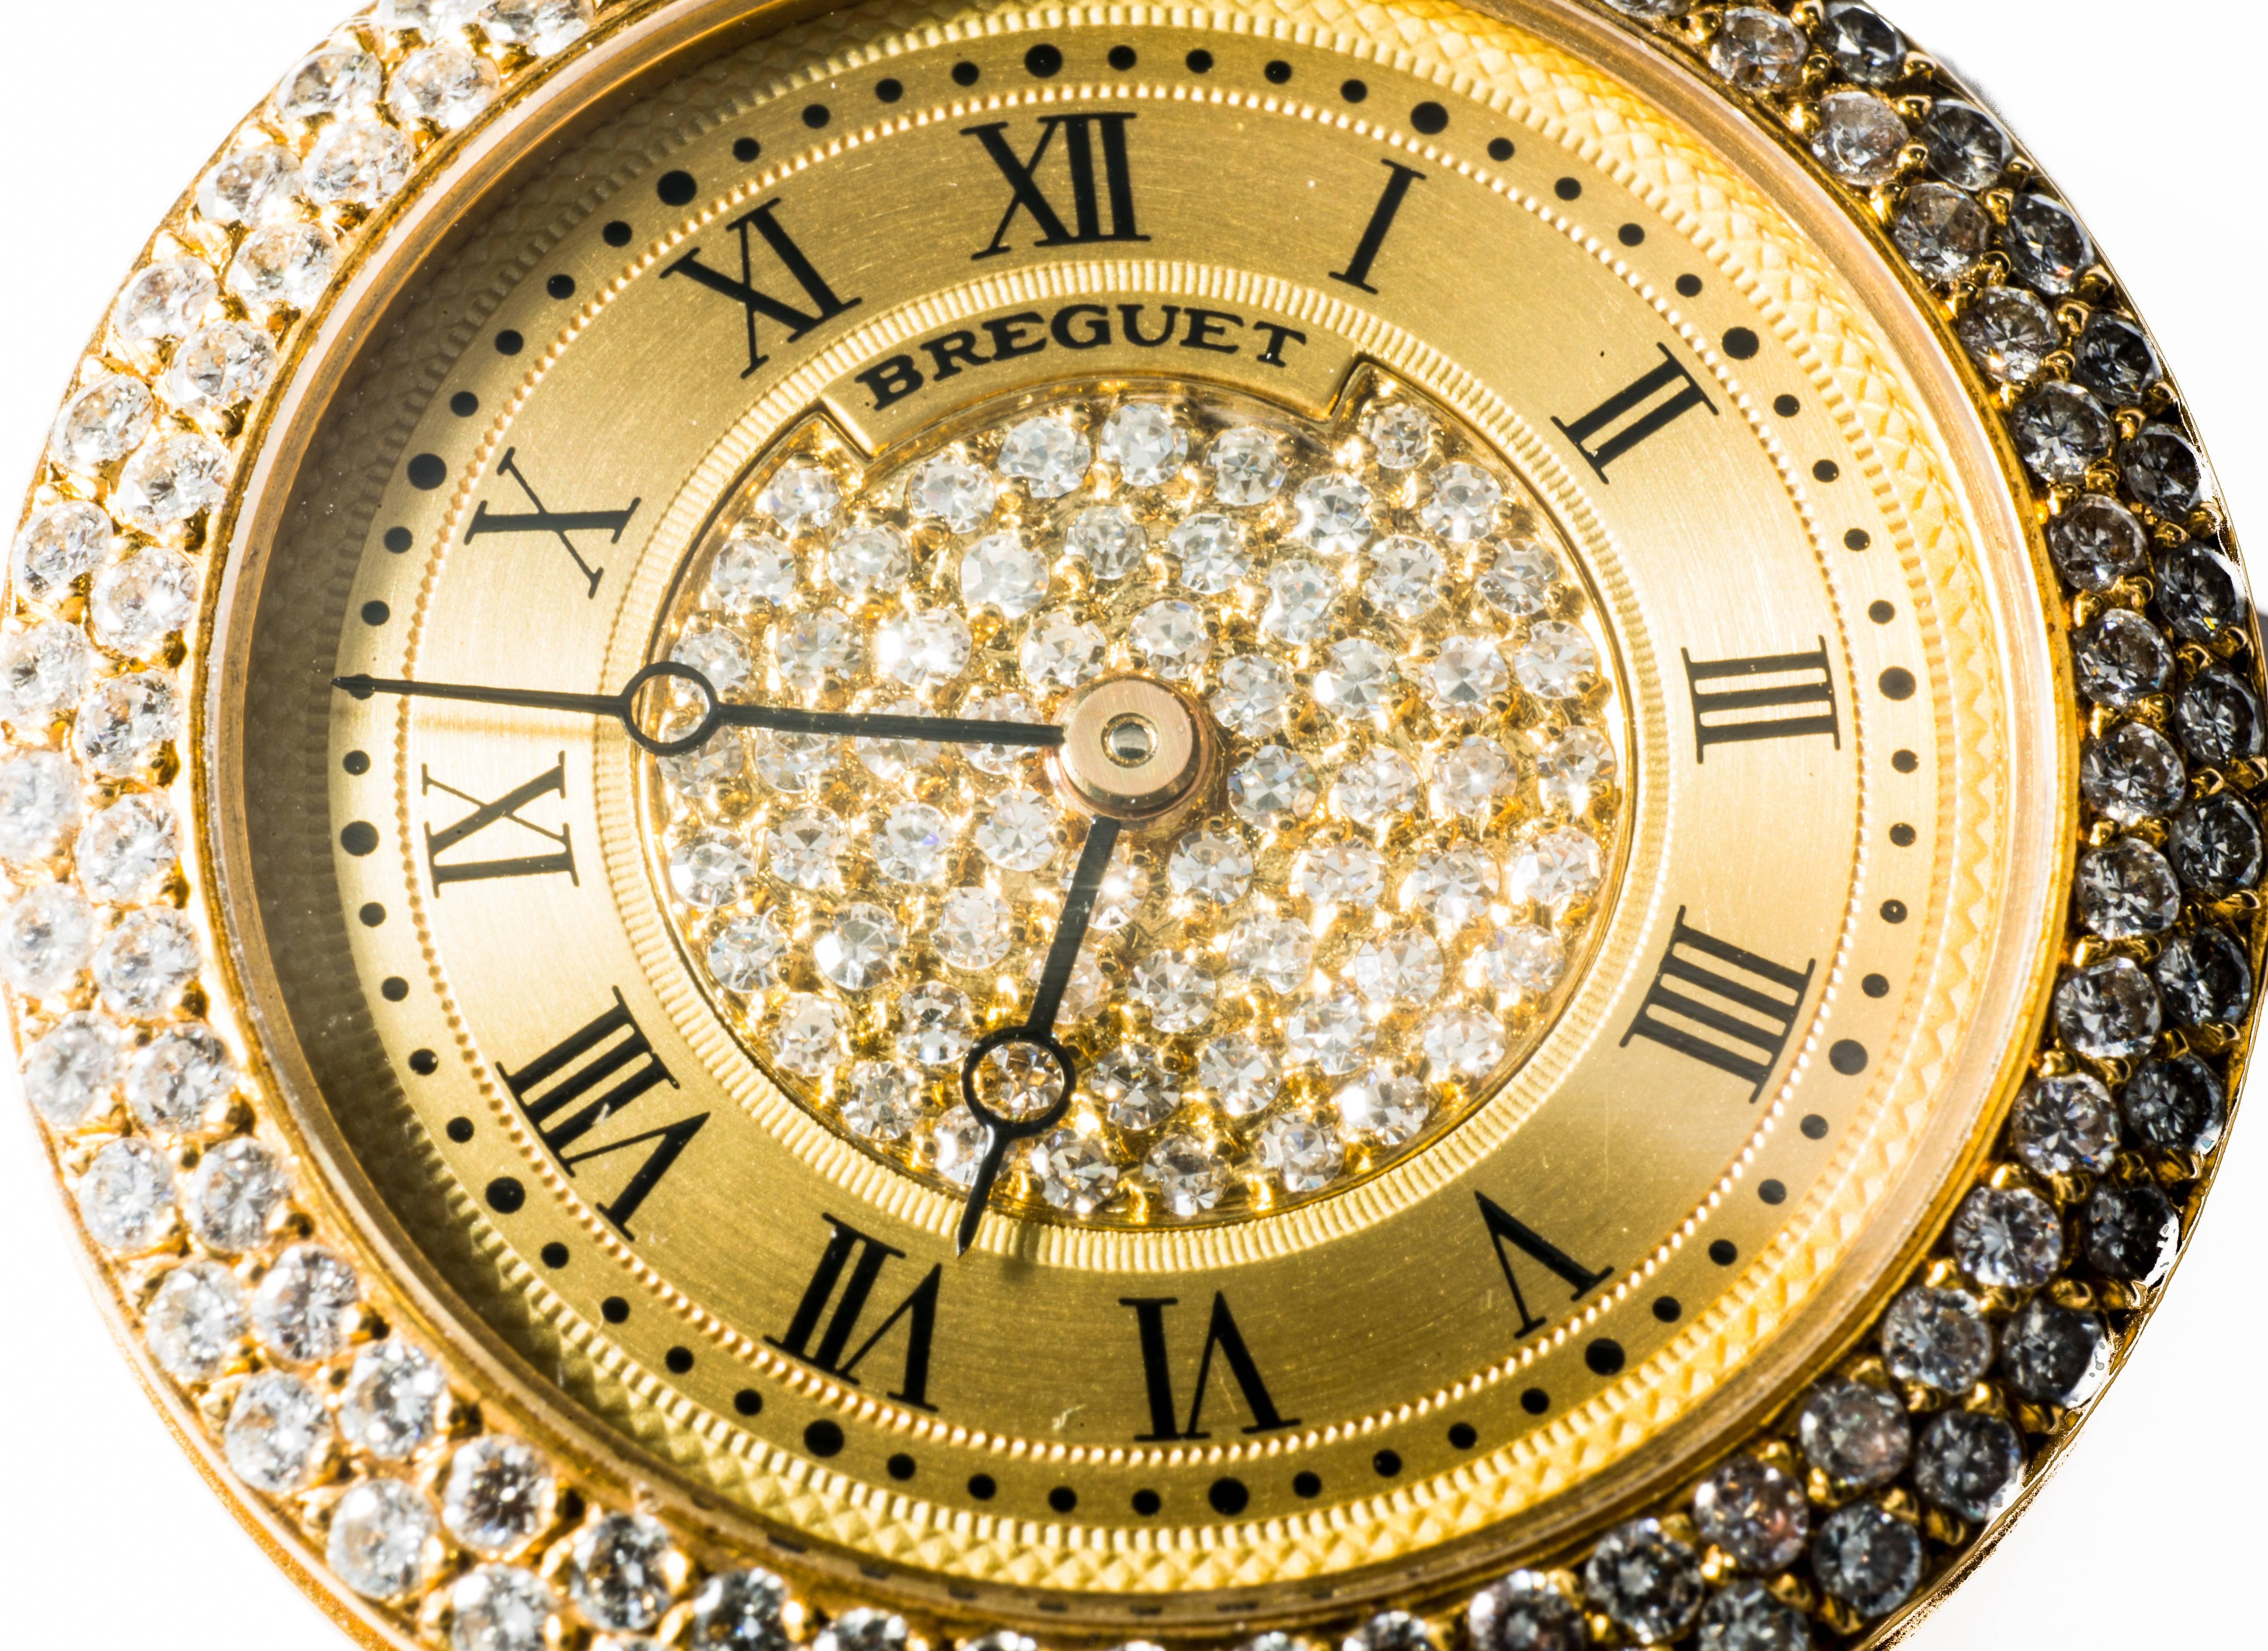 This Breguet watch in yellow gold has extra-white diamonds all around the case and a rich pavé at the centre. It's shape and design are classic and can make a beautiful pendant necklace. Dials are expressed in roman numbers and the crown is